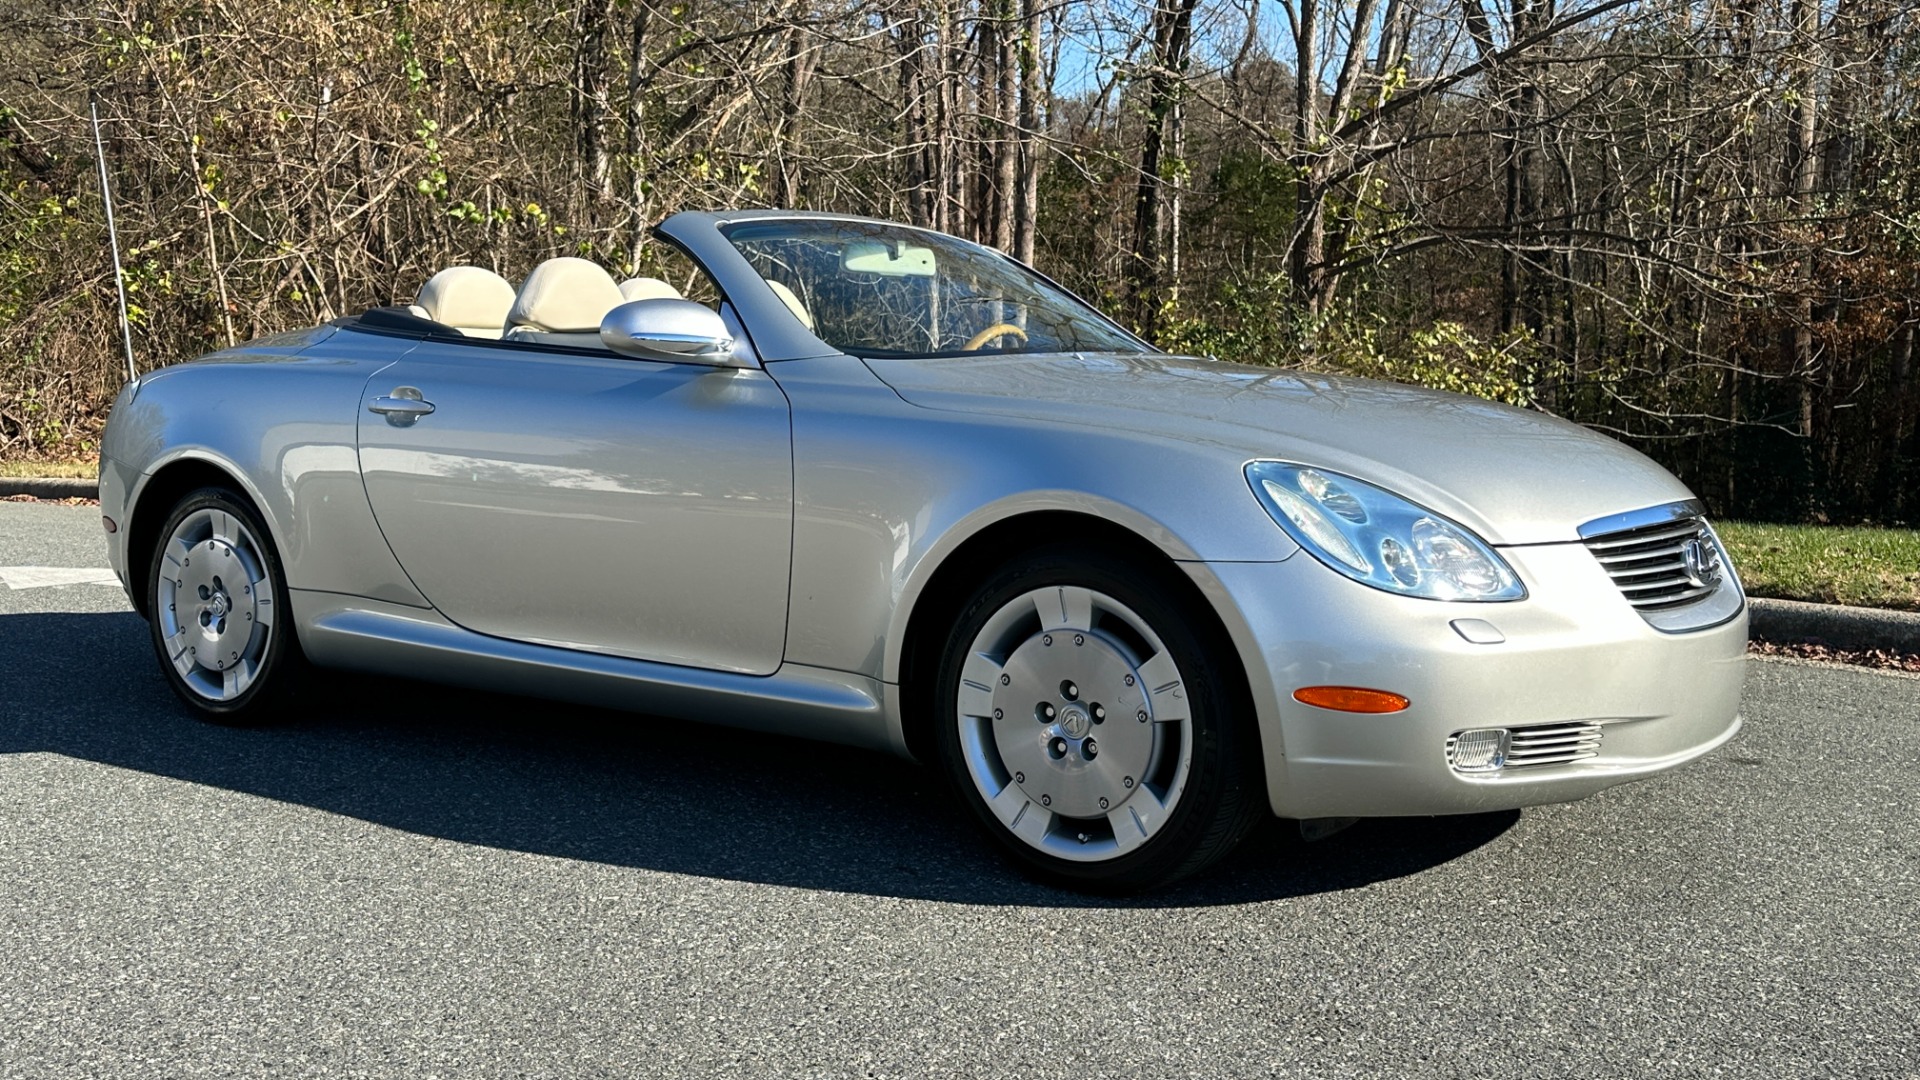 Used 2003 Lexus SC 430 HARD TOP CONVERTIBLE / TAN LEATHER INTERIOR / LOW MILES / 4.3L V8 ENGINE for sale $23,995 at Formula Imports in Charlotte NC 28227 8